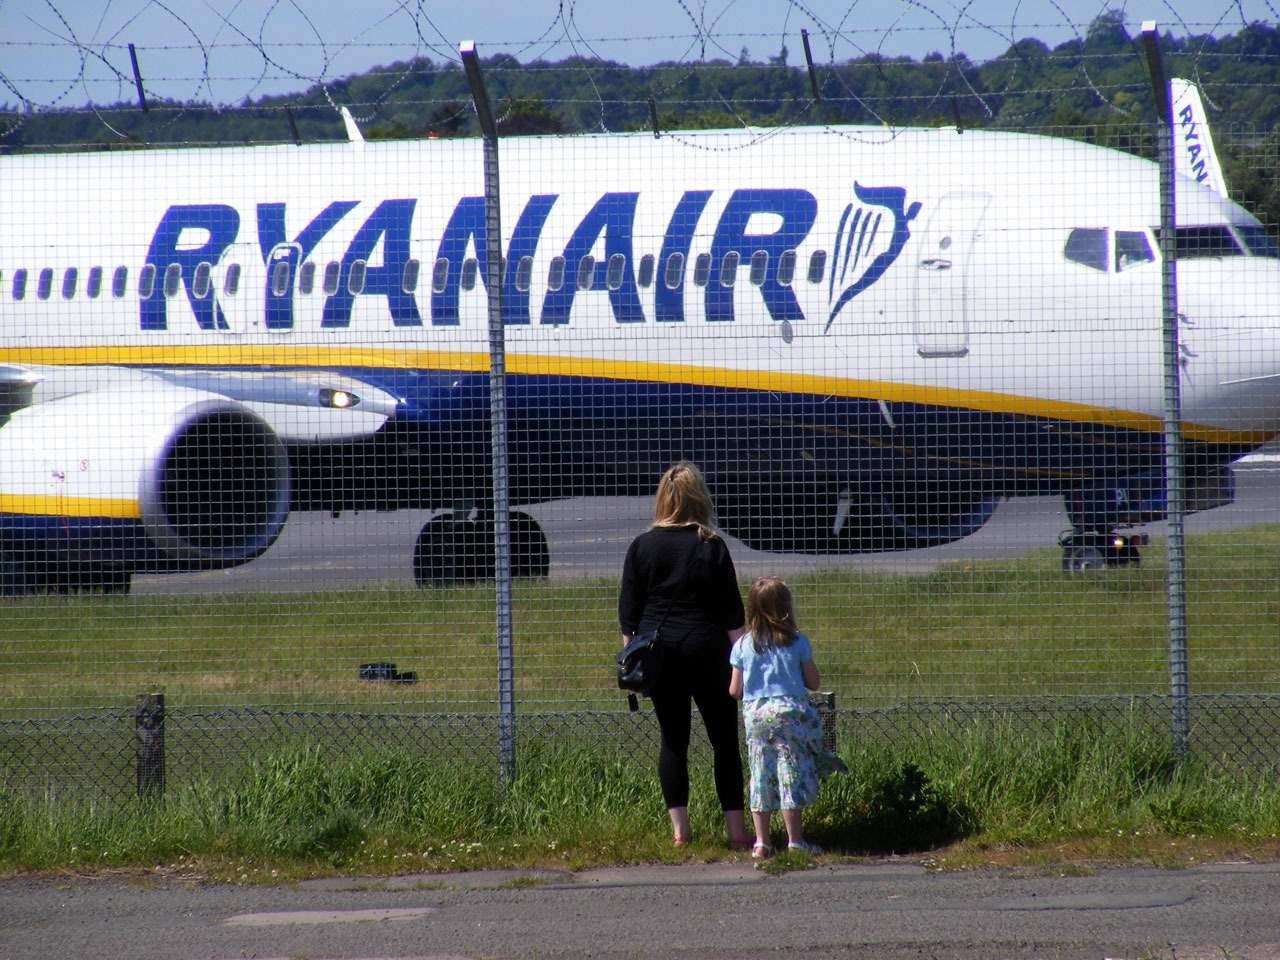 white and blue ryanair air liner